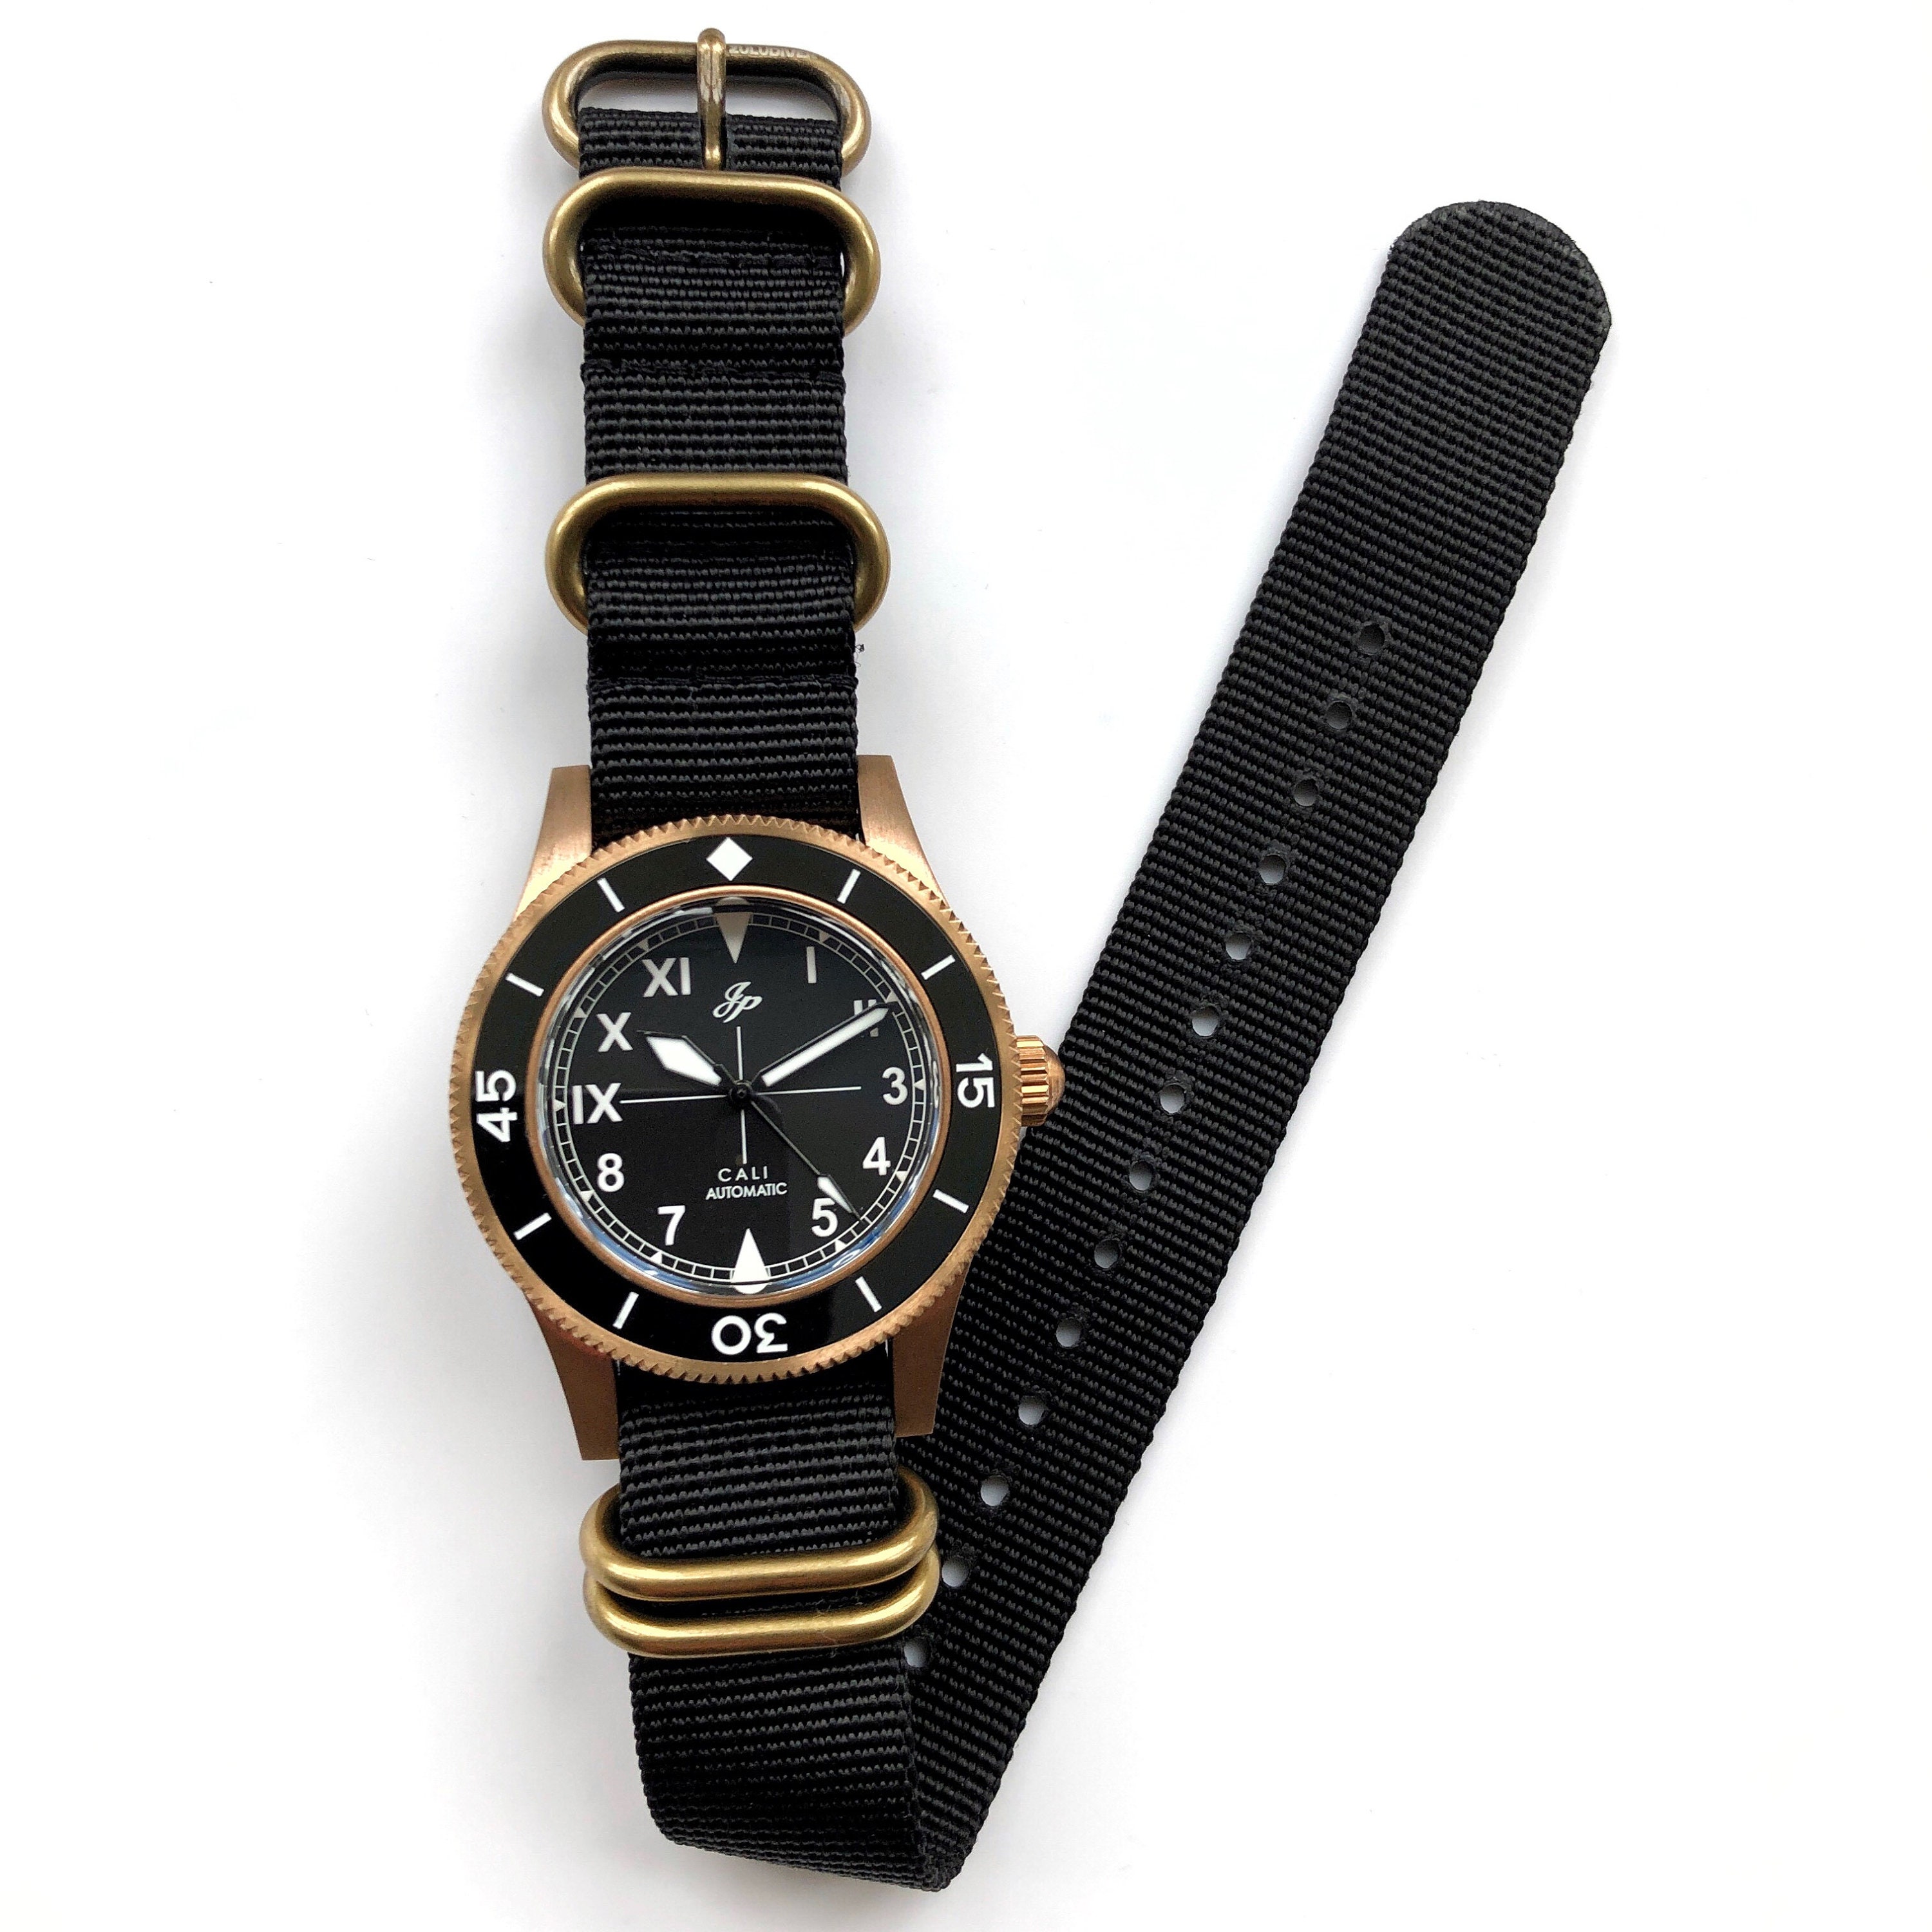 JP Cali-046 Bronze Vintage Diver Automatic Watch seiko SII - Etsy